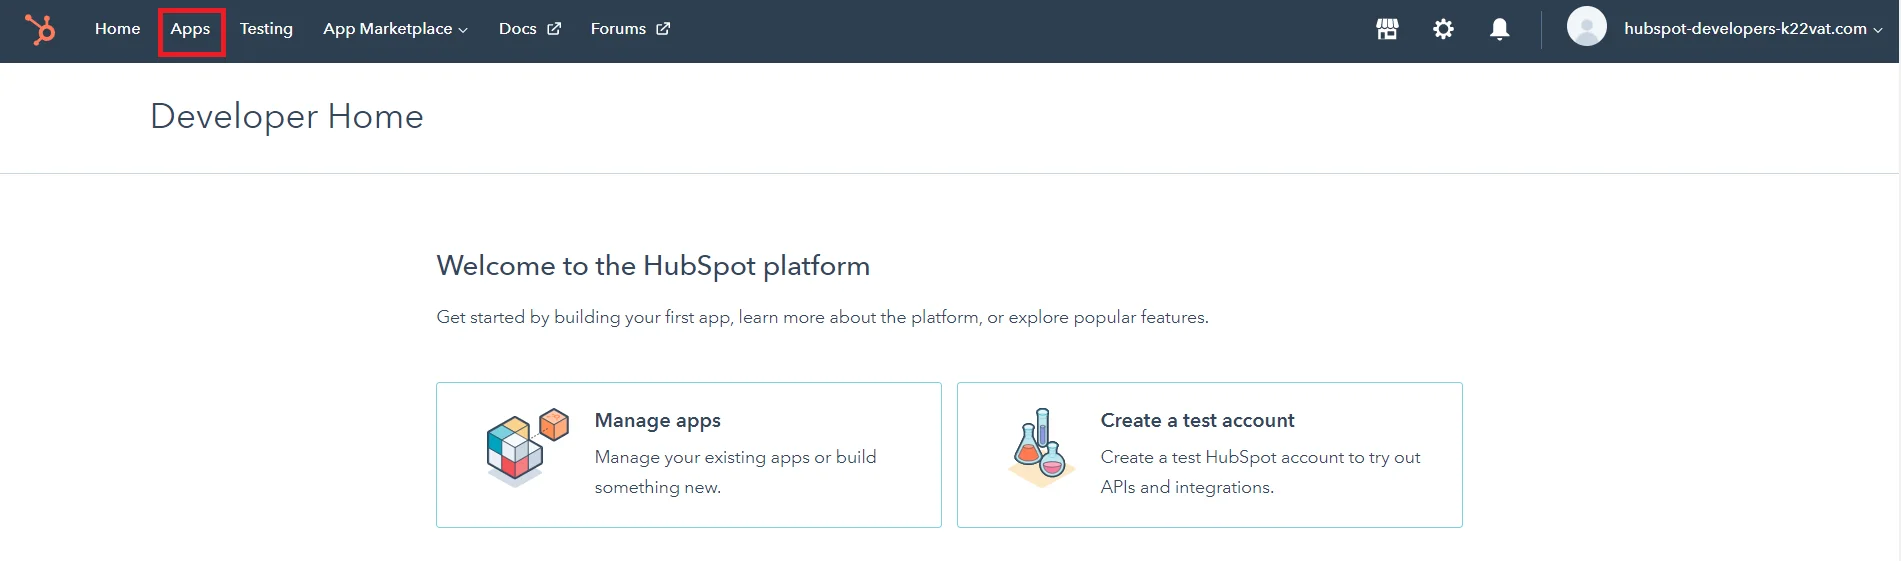 Hubspot Single Sign-On (SSO) OAuth - goto apps tab